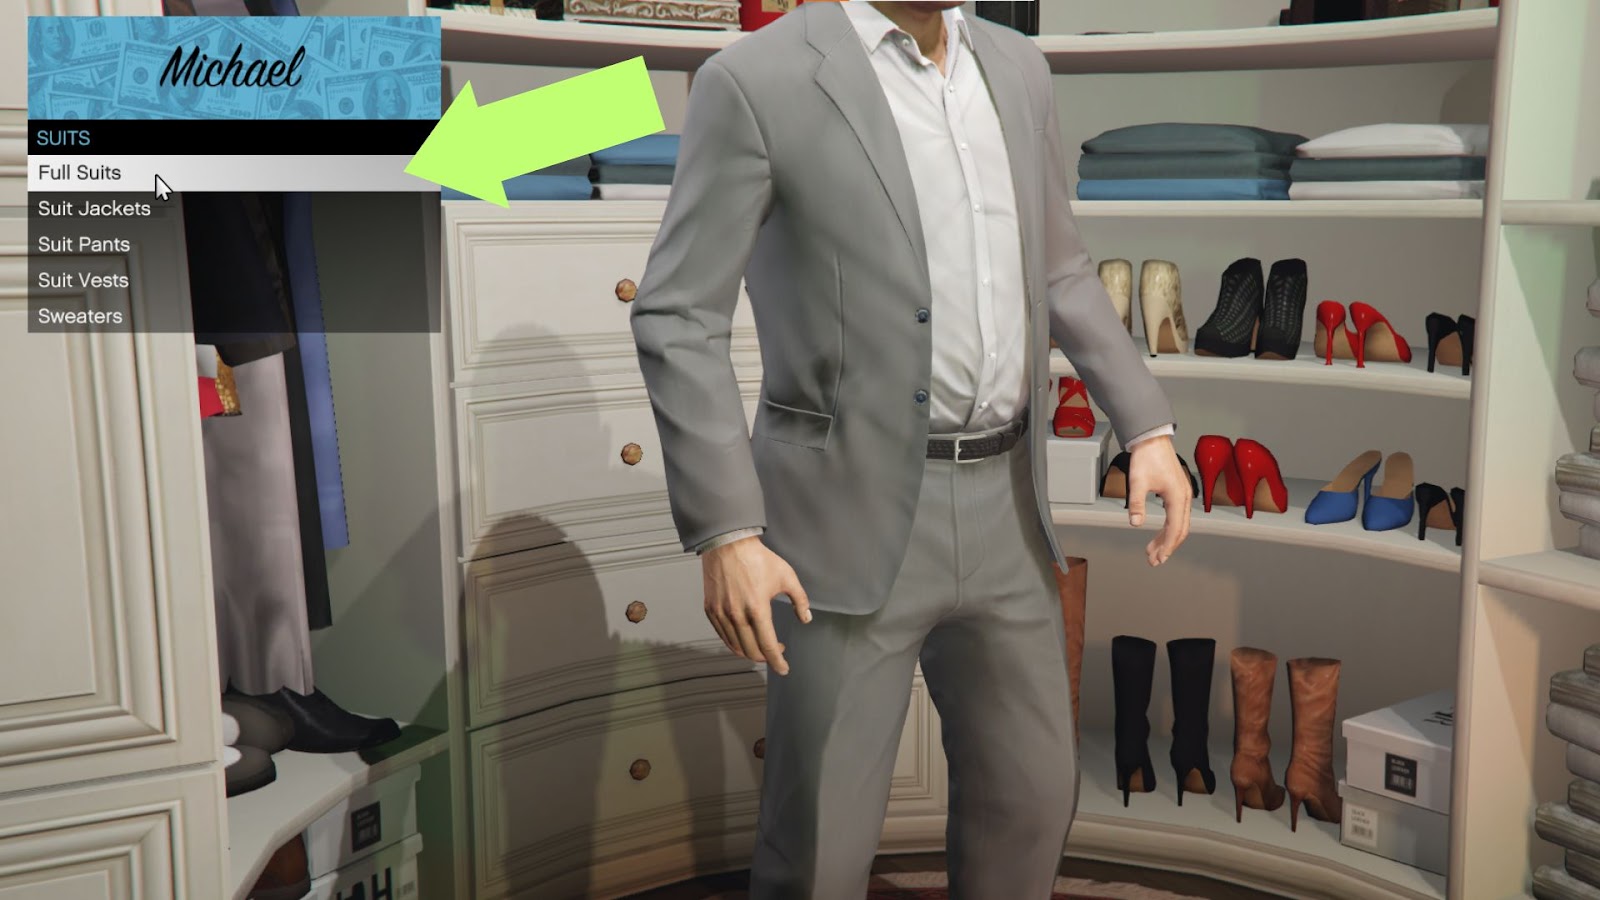 You need to change into a full suit to count as a Smart Outfit in GTA V. 